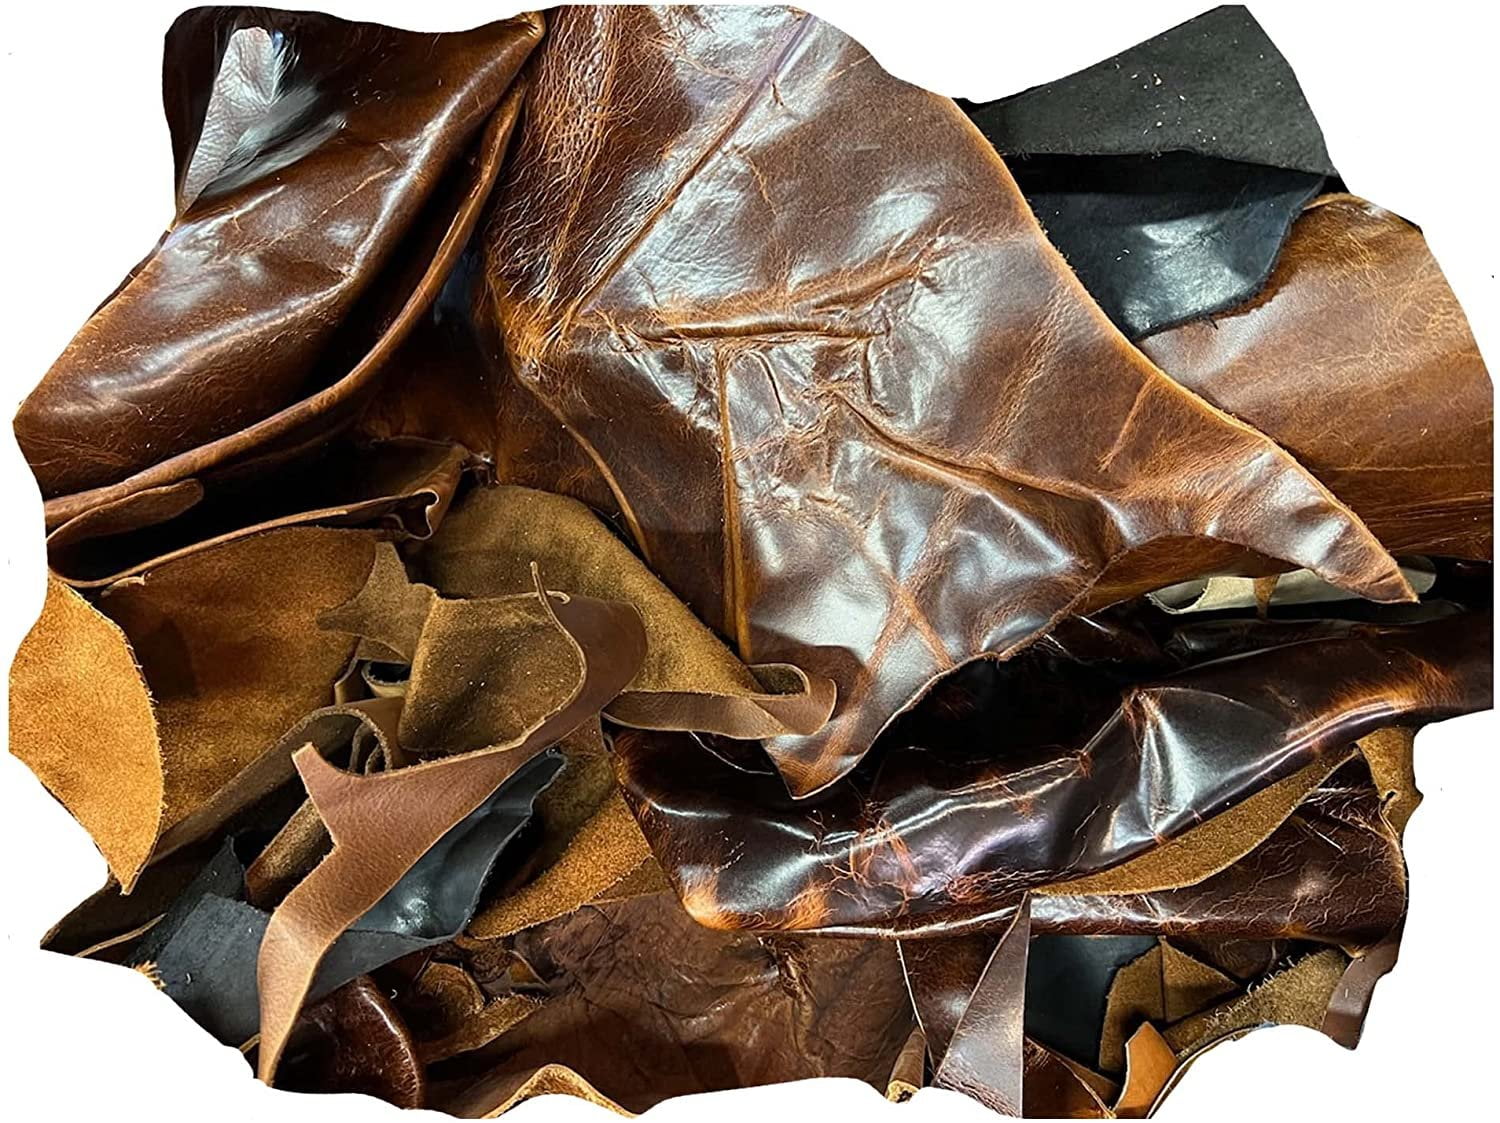 ELW 4-6 oz. 1.8-2.4mm Thickness, 1 LB Vegetable Tanned Leather Scraps,  Mixed Whiskey, Cowhide Remnants Full Grain Leather for Tooling, Holsters,  Knife